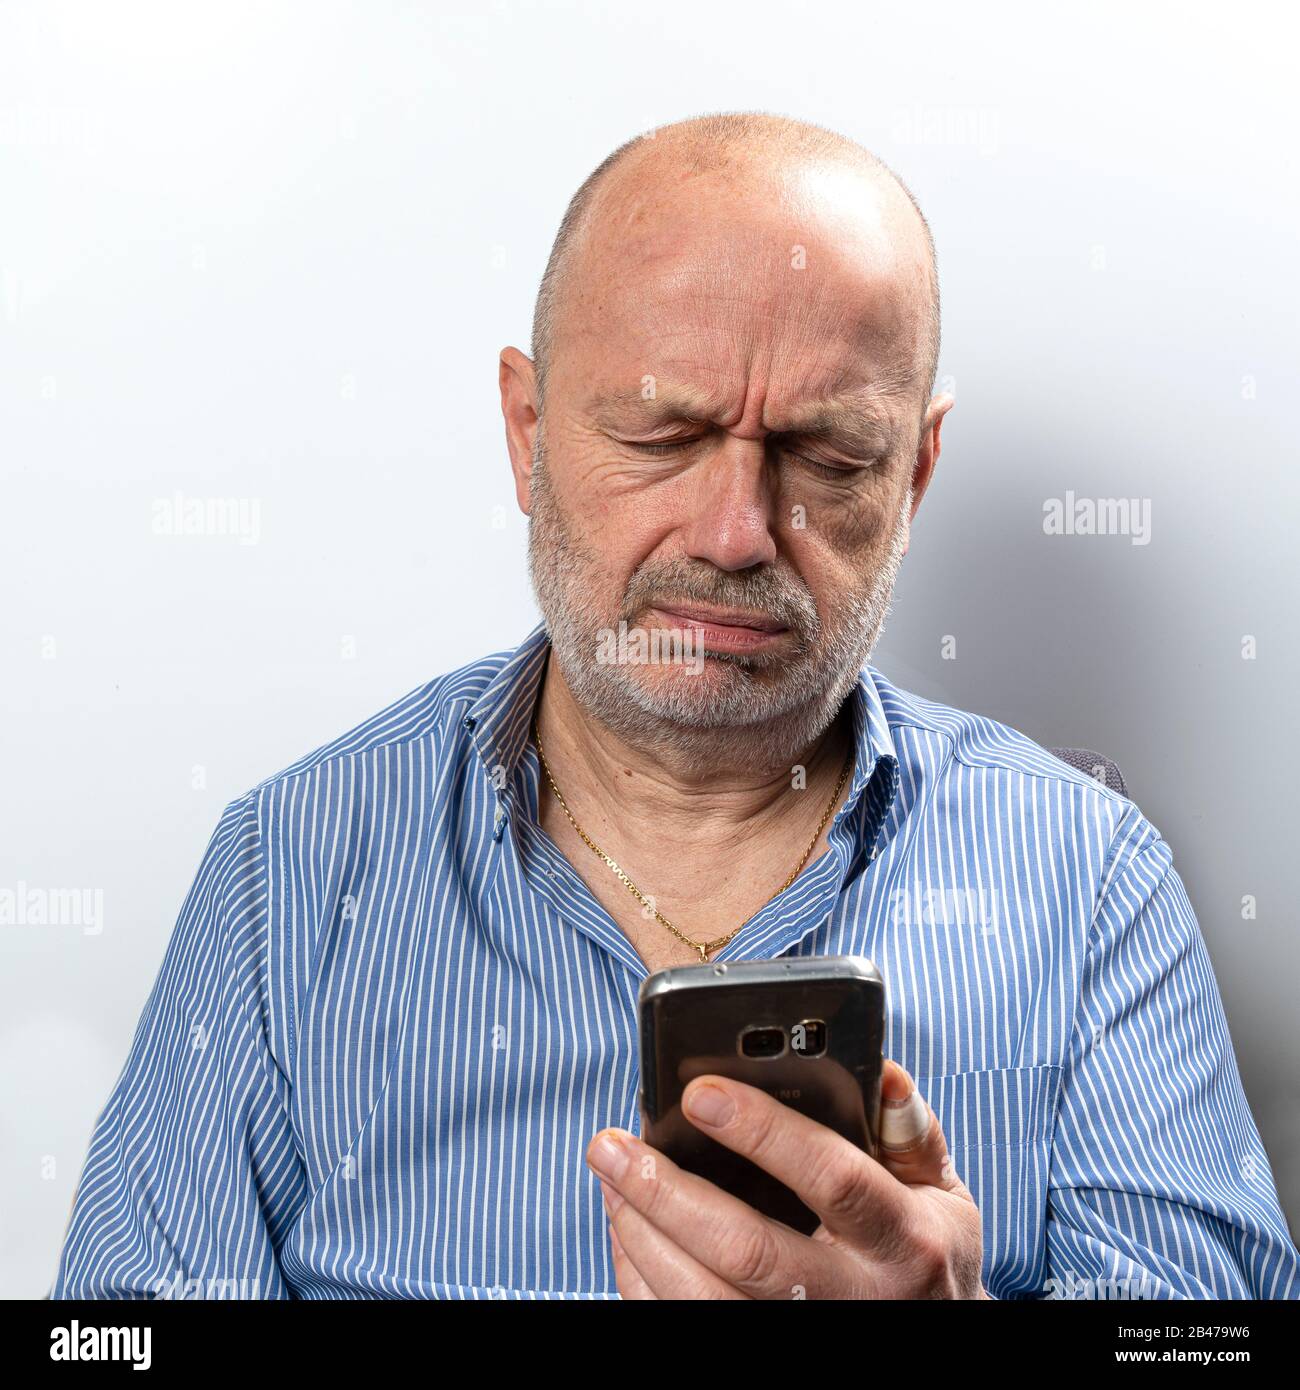 A middle-aged man bored while talking on a cell phone Stock Photo